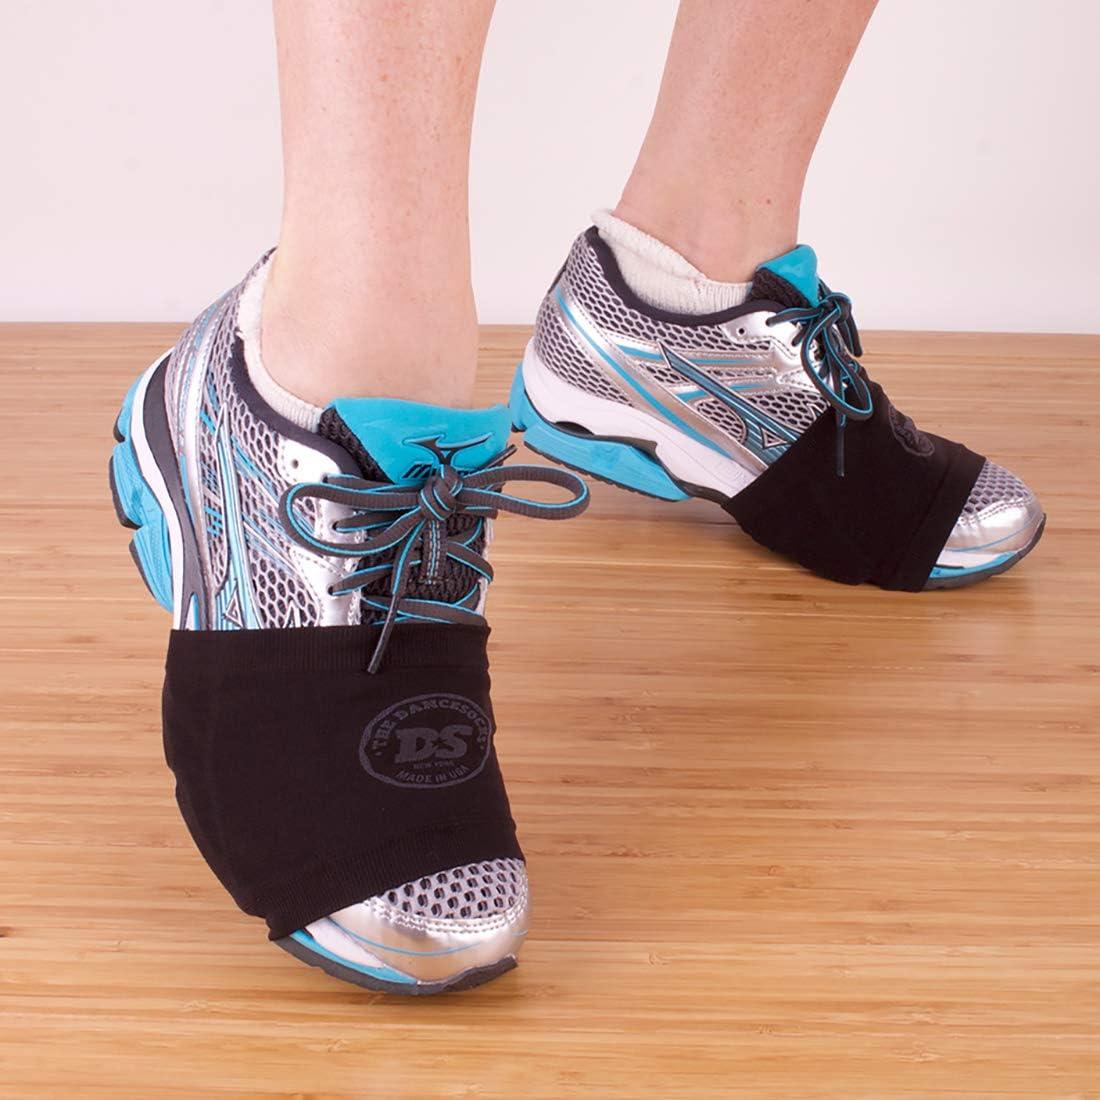  2 FEET Sock for Dancing on Smooth Floors, Over Sneakers,  Smooth Pivots & Turns to Dance with Style on Wood Floors